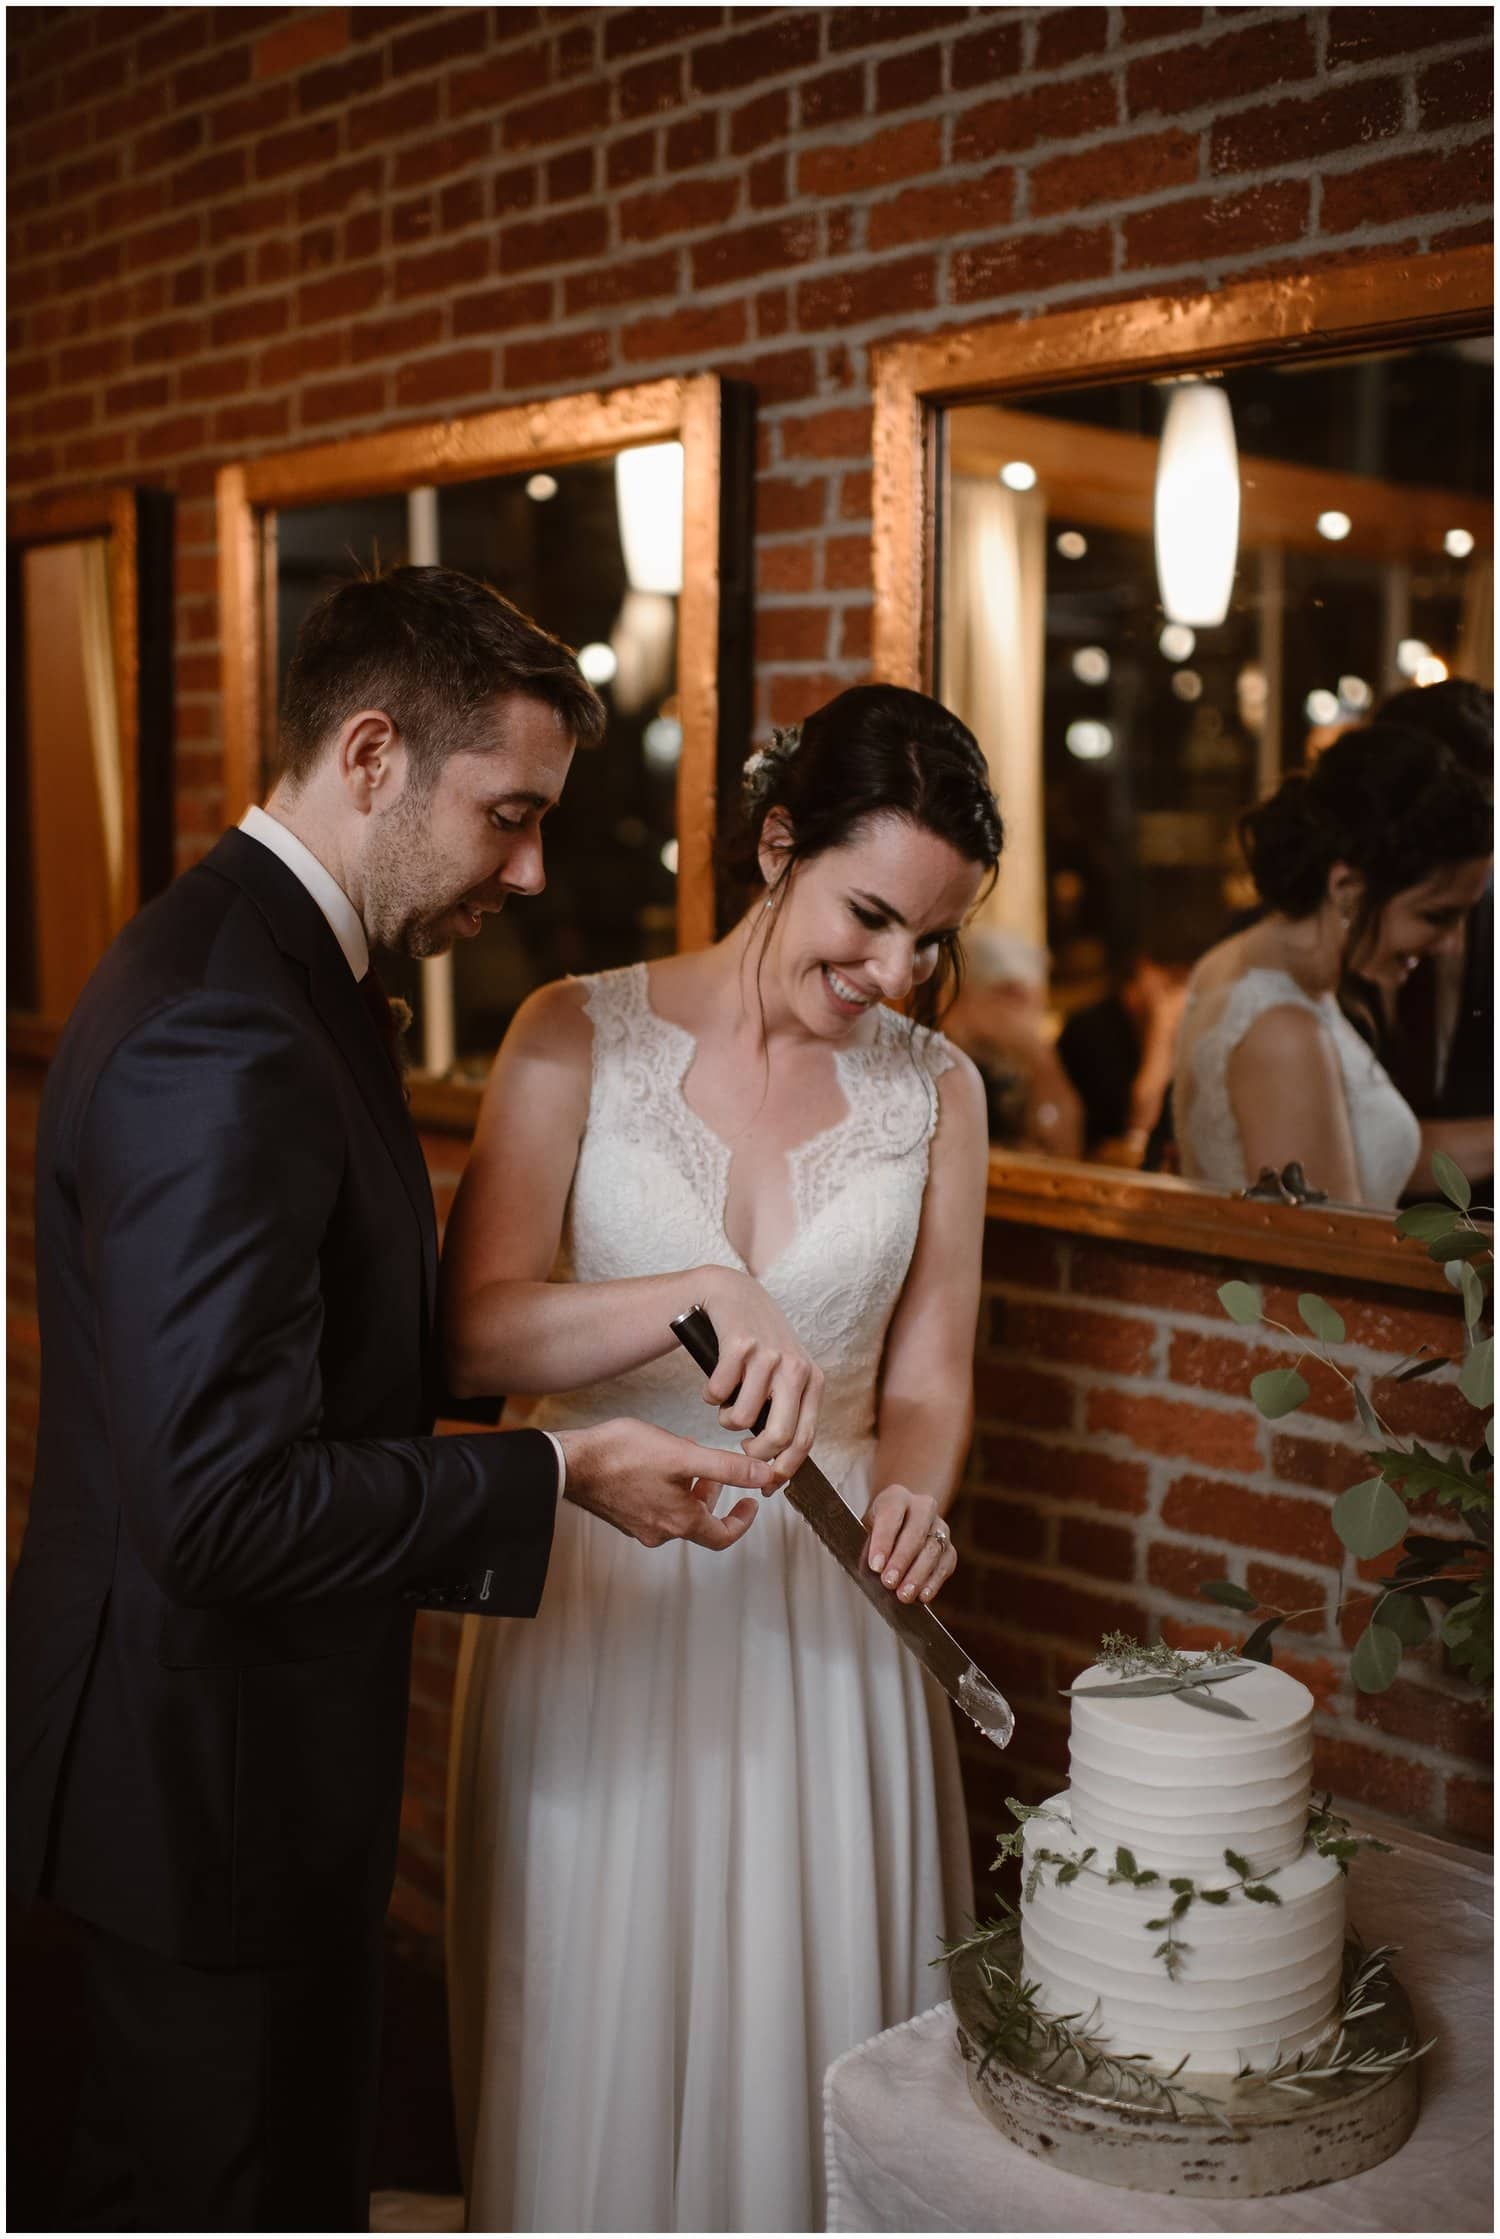 Bride and groom cut their wedding cake together during their reception. 